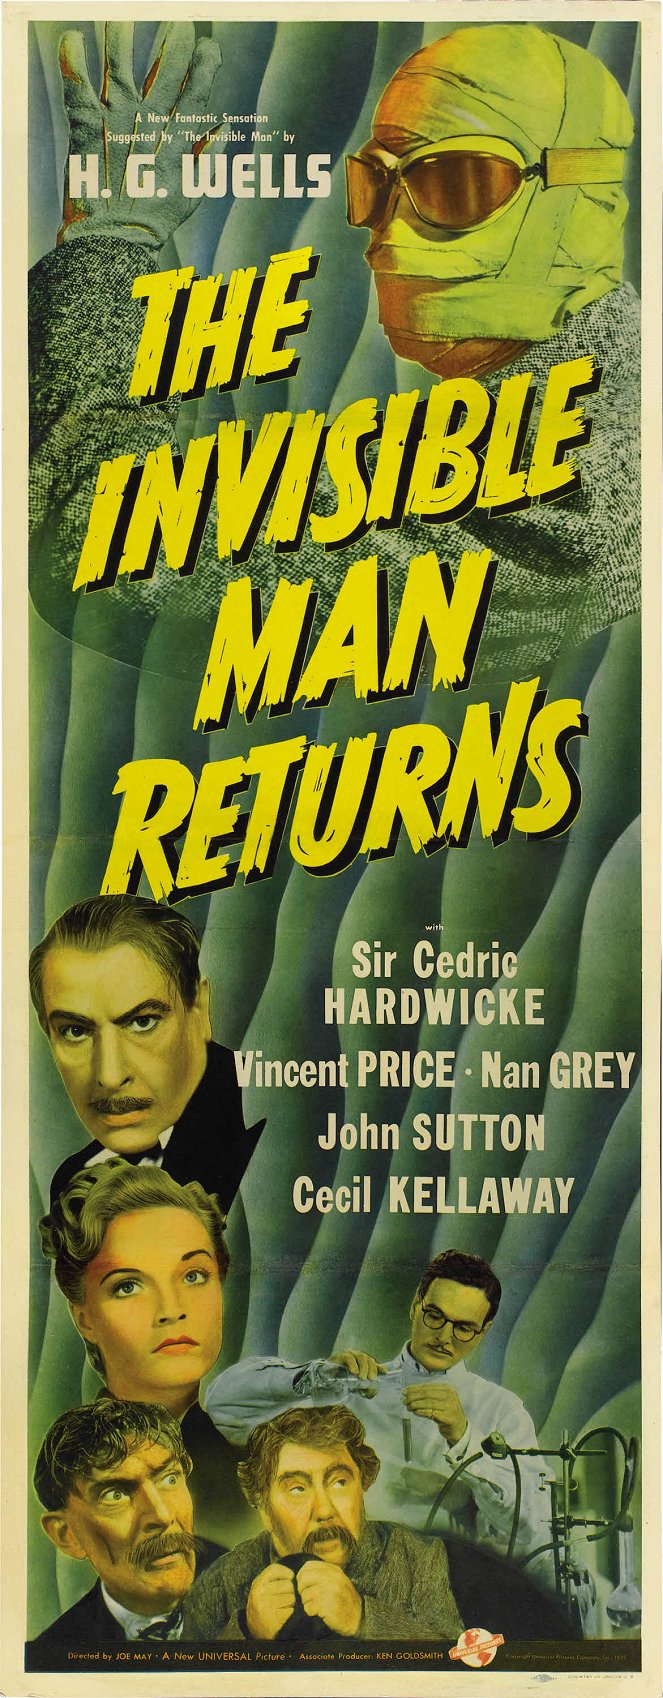 The Invisible Man Returns - Julisteet